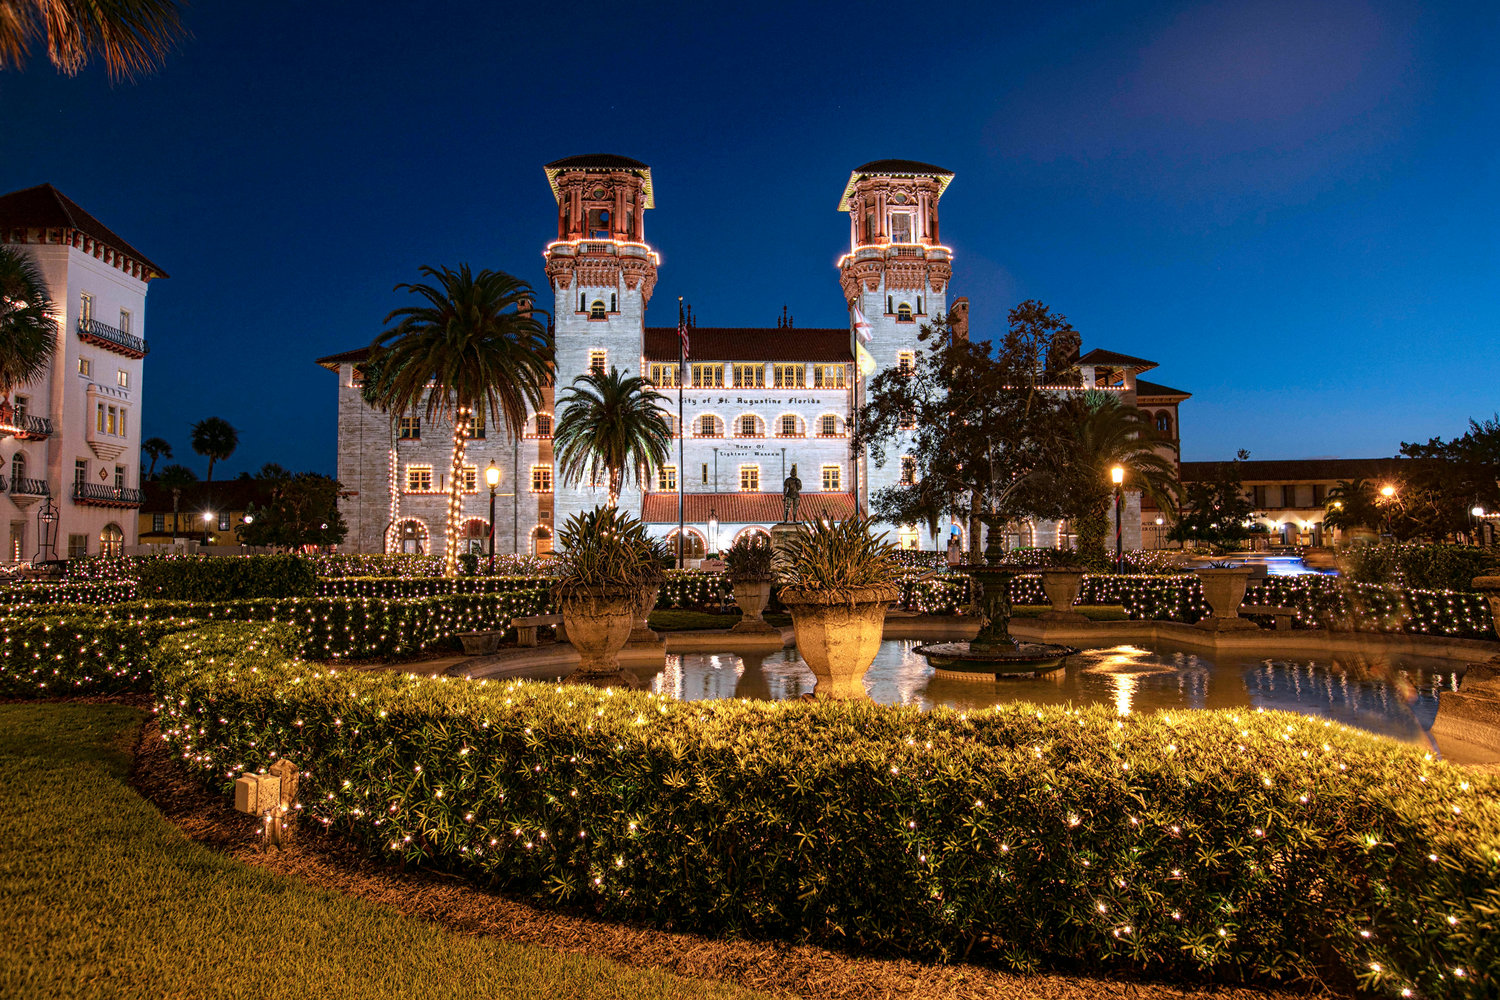 The Lightner Museum is planning "Music in the Museum: Holiday Nights at the Lightner," a festive event featuring the St. Augustine Orchestra.